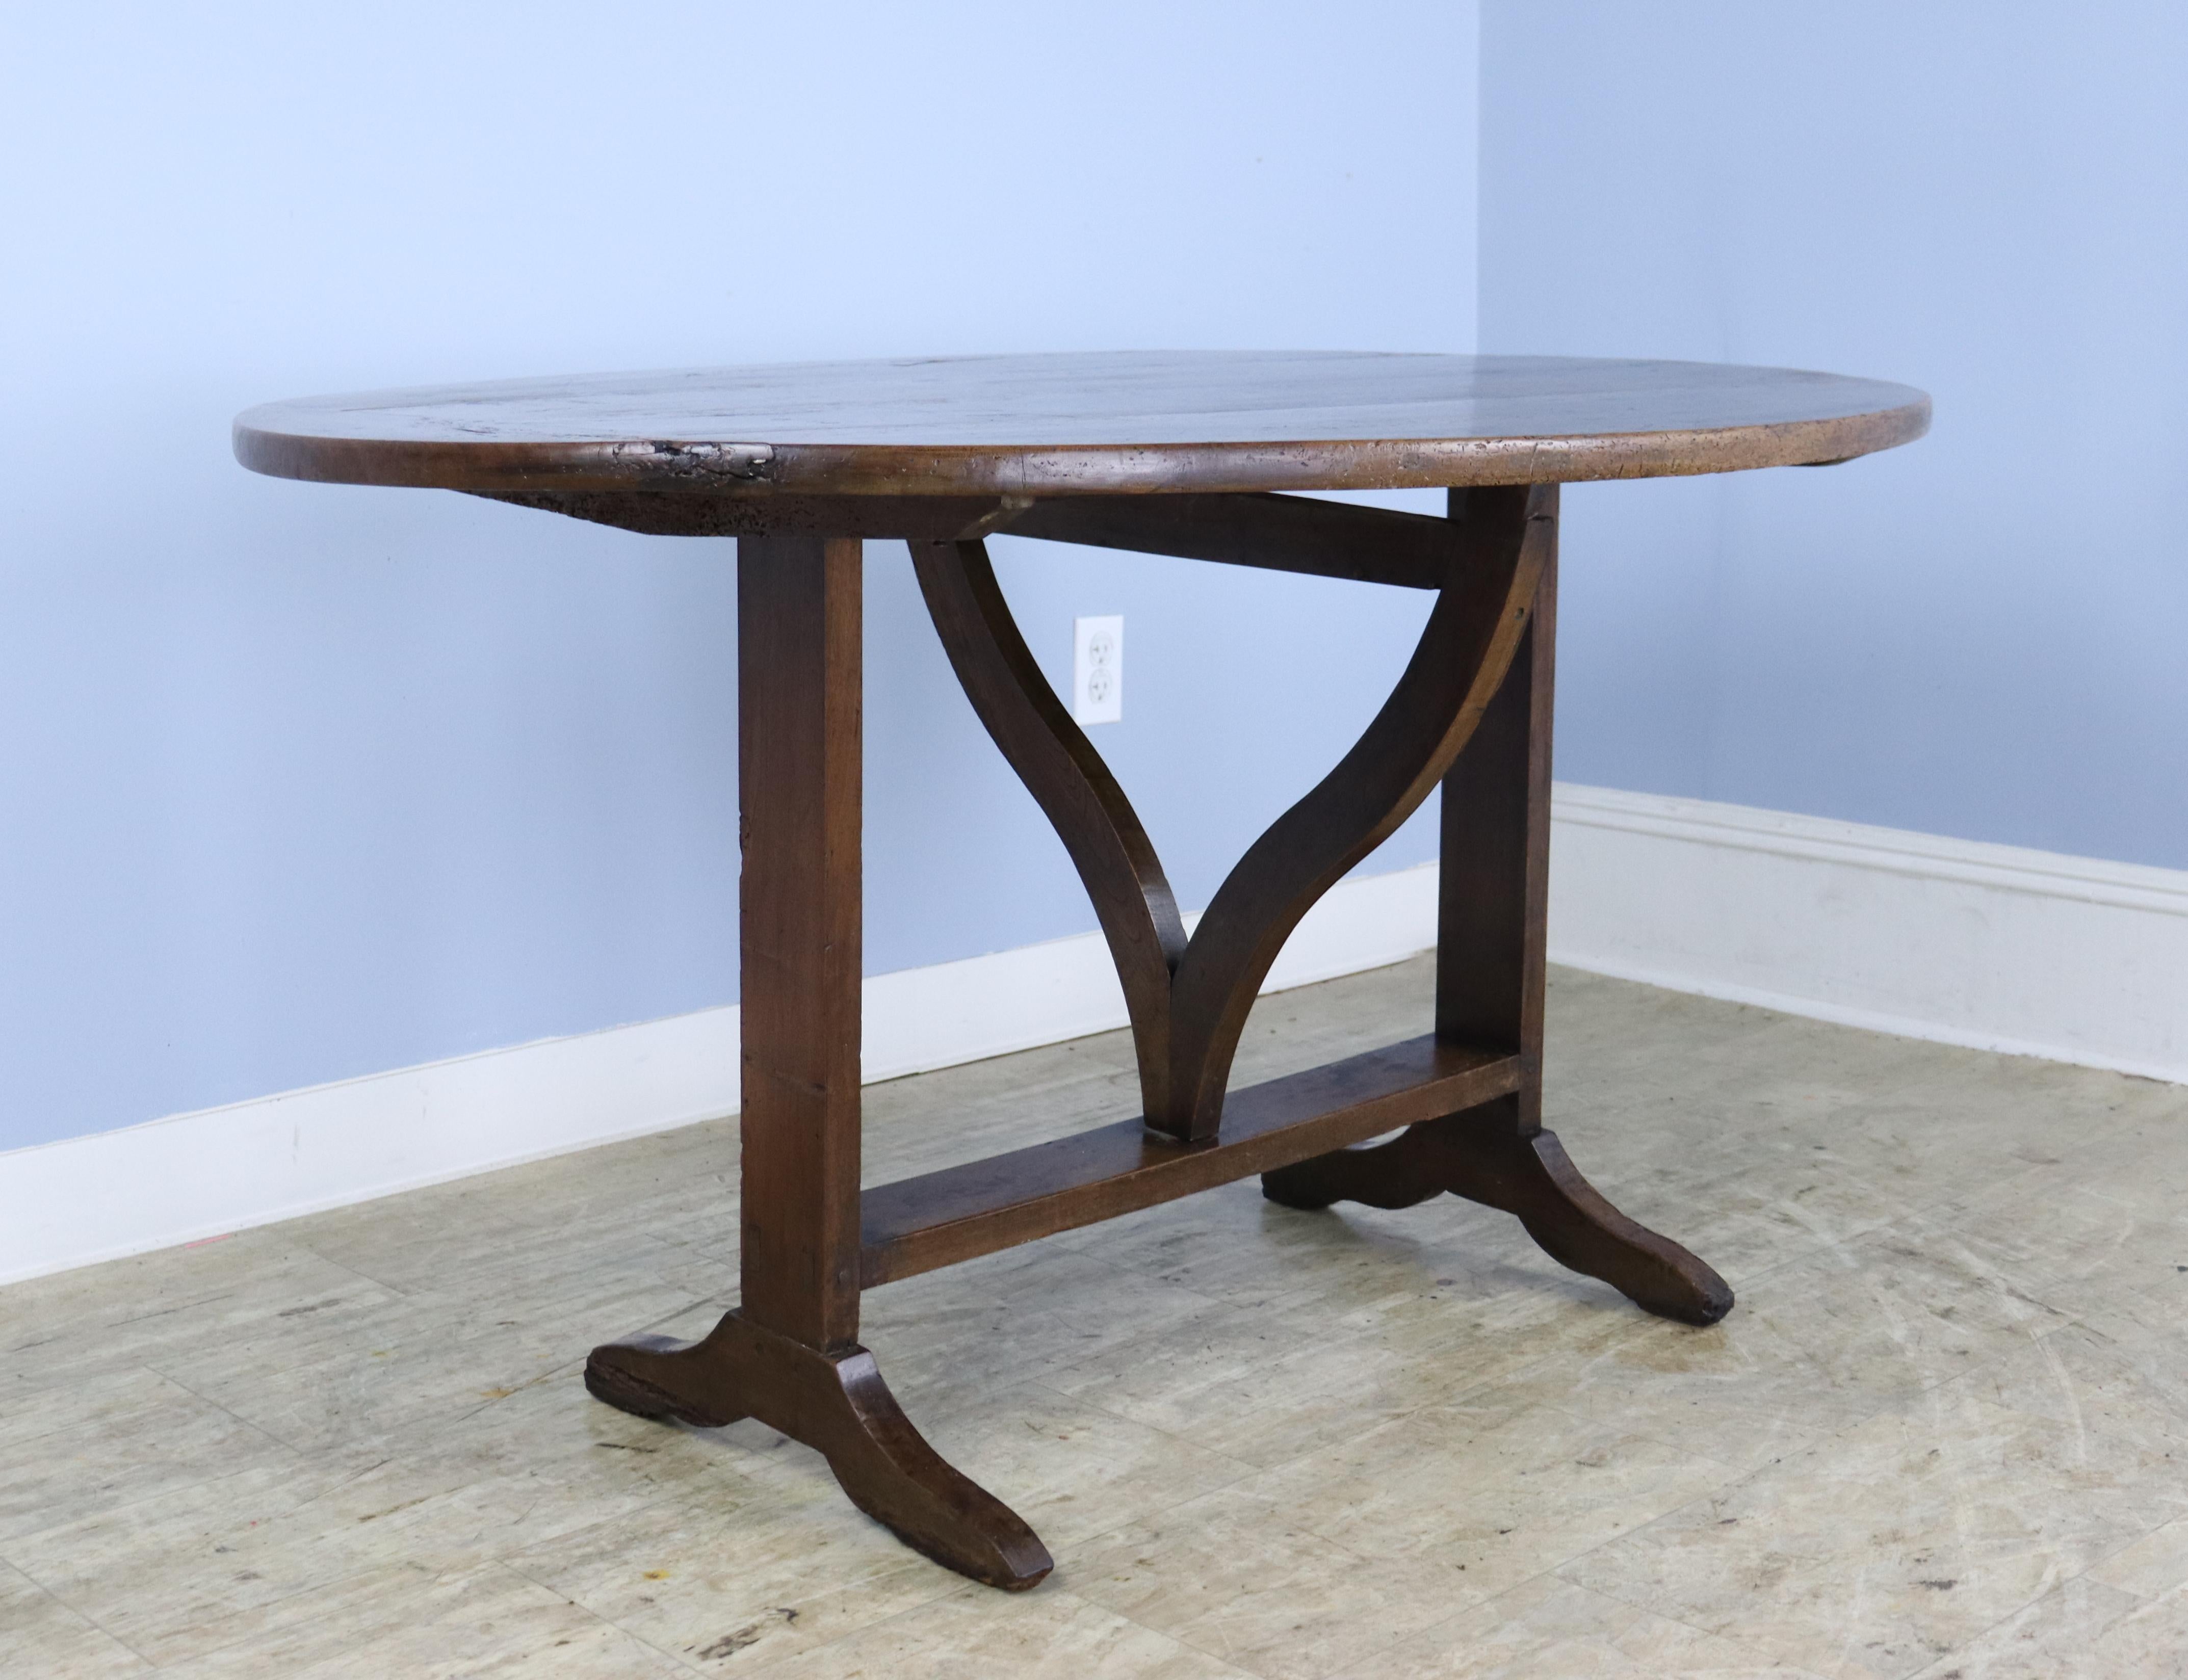 With a width of 51.5 inches, this lovely oval table will provide good seating for a small group, and has the advantage of not having an apron to get in the way of knees or chairs. The vendange table, typically used in the wine tasting room at the